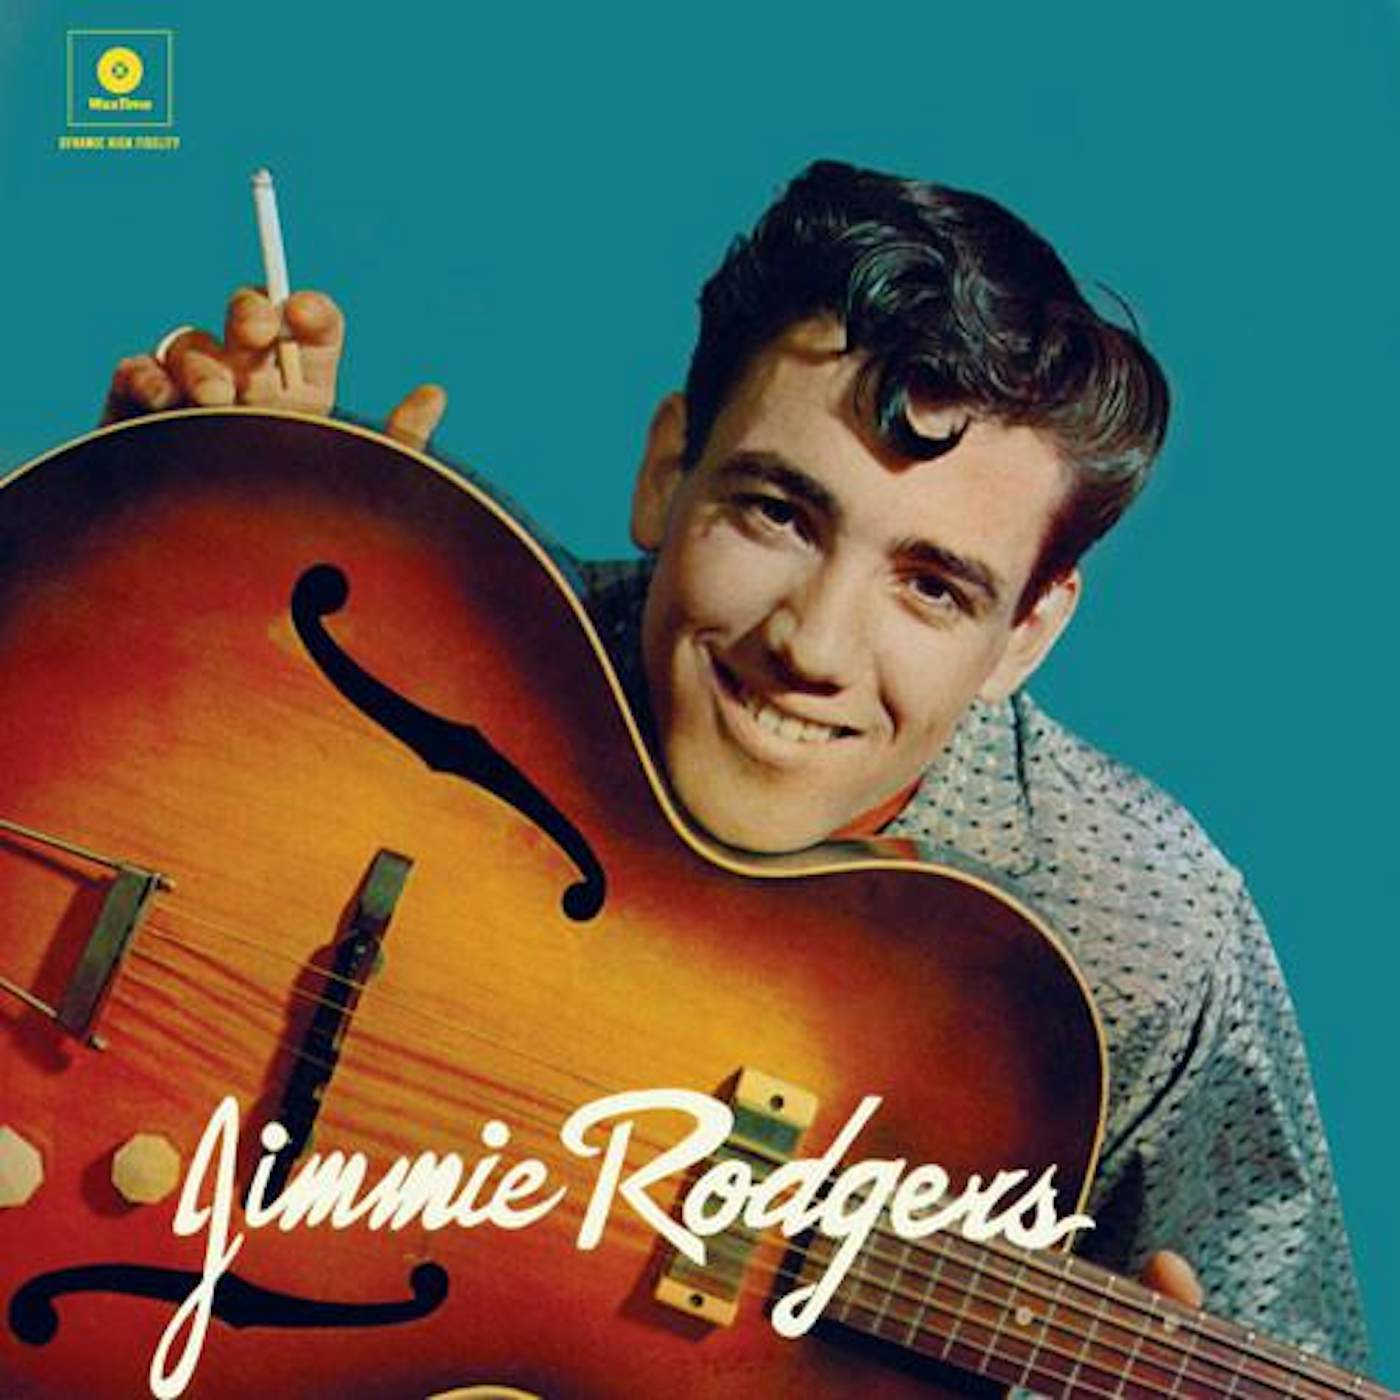 JIMMIE RODGERS Vinyl Record